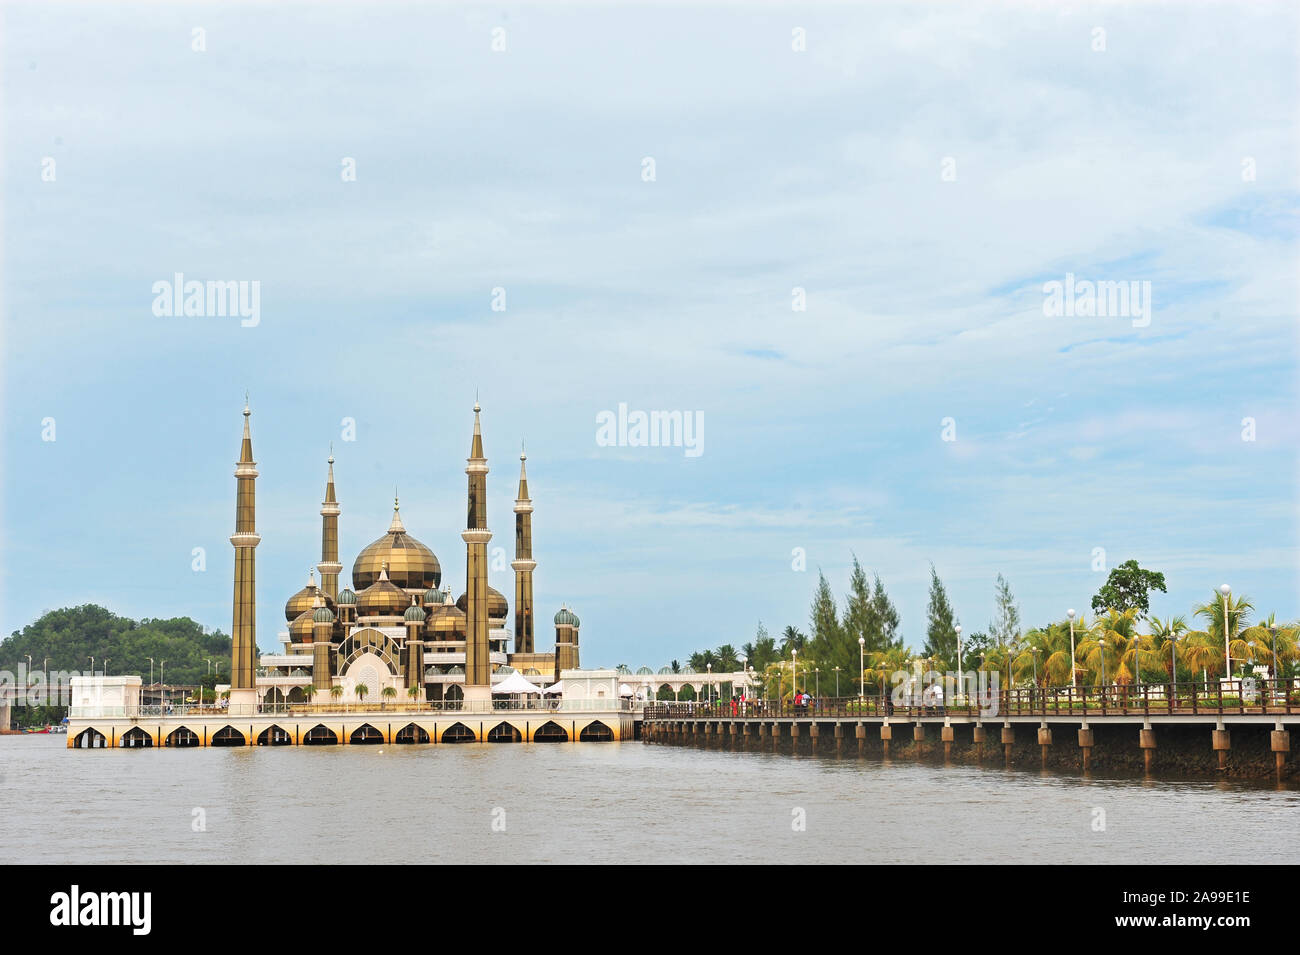 The Crystal Mosque or Masjid Kristal is a mosque in Wan Man, Terengganu, Malaysia. Stock Photo